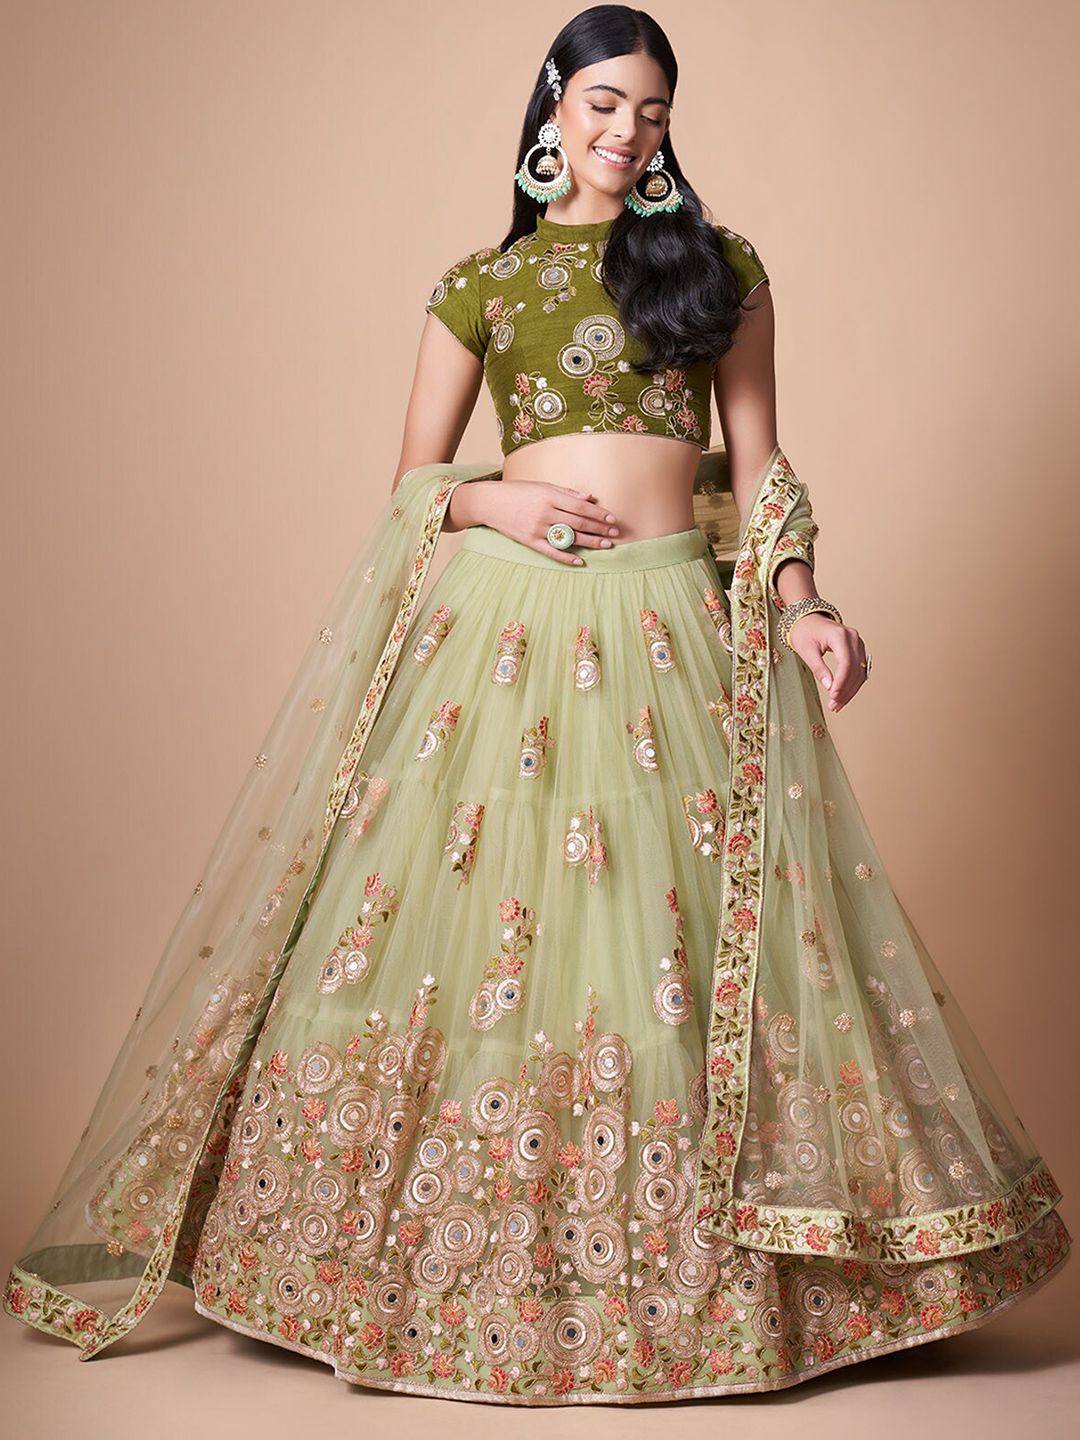 ODETTE Embroidered Beads and Stones Semi-Stitched Lehenga & Unstitched Blouse With Price in India